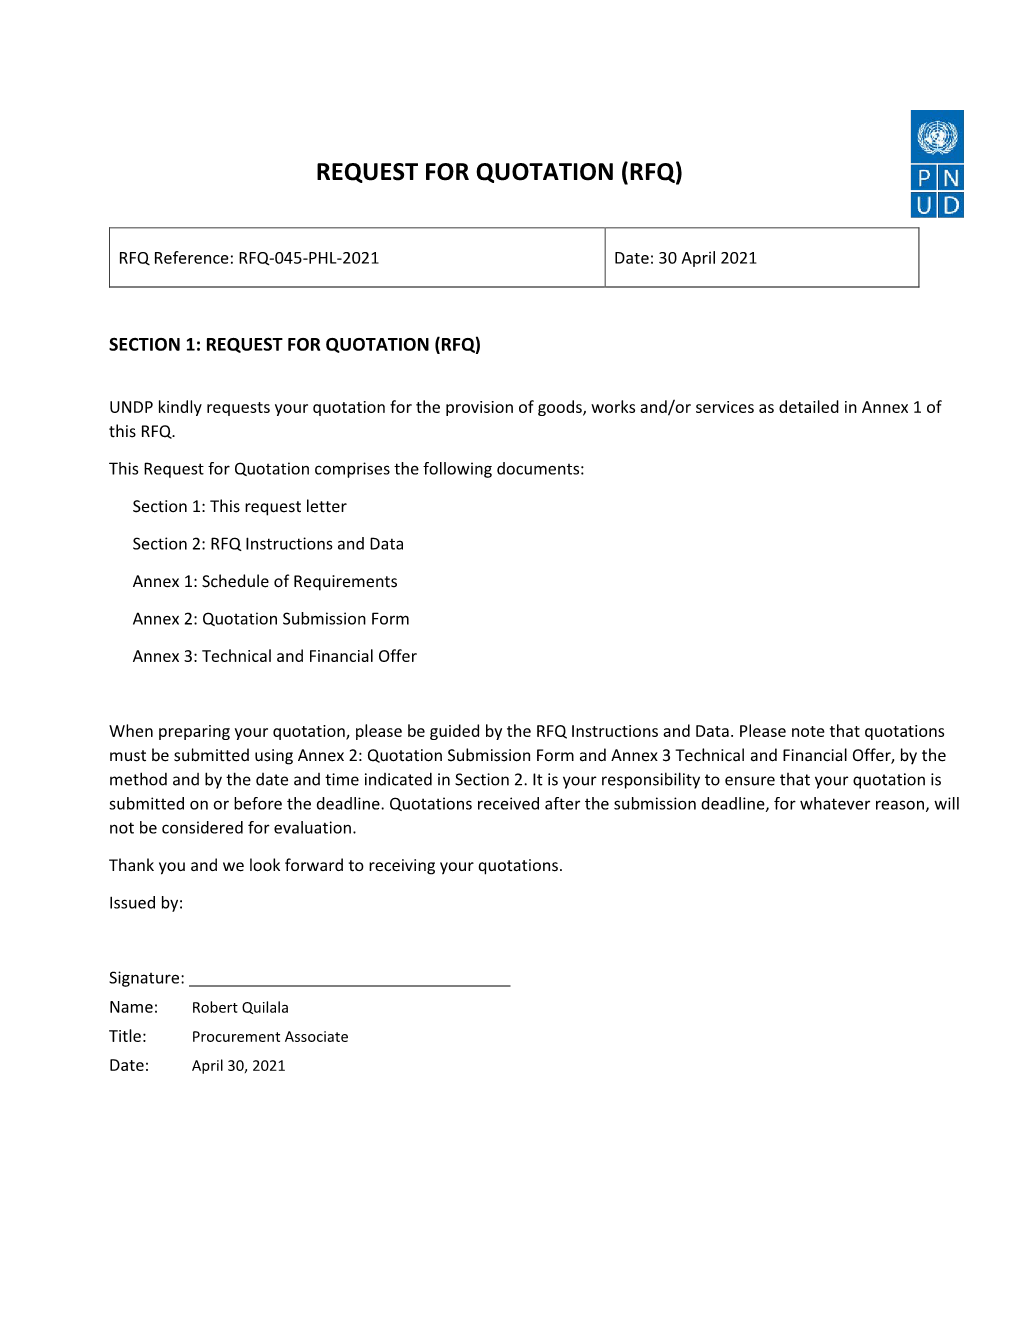 Section 1: Request for Quotation (Rfq)